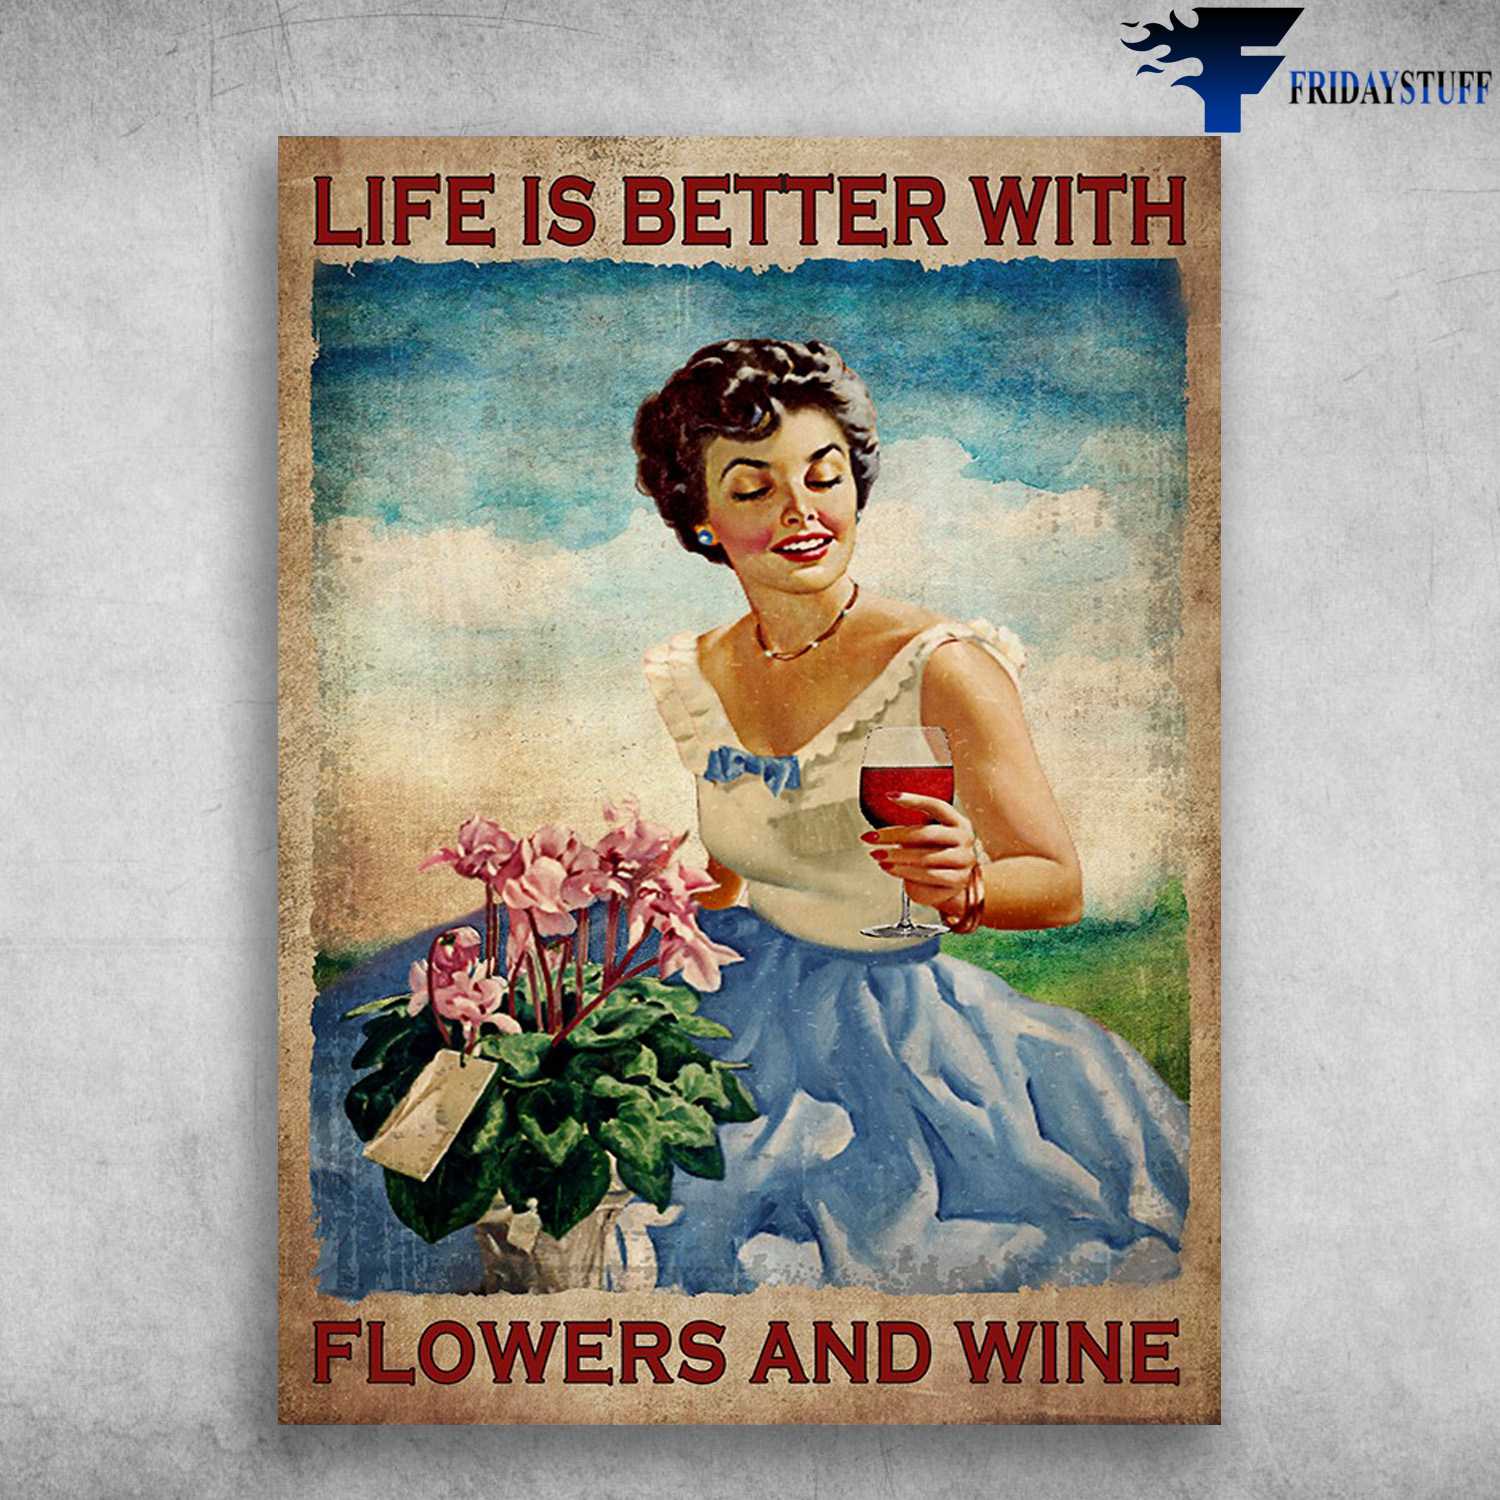 Lady Drinks Wine, Flower Wine Lover - Life Is Better With, Flower And Wine